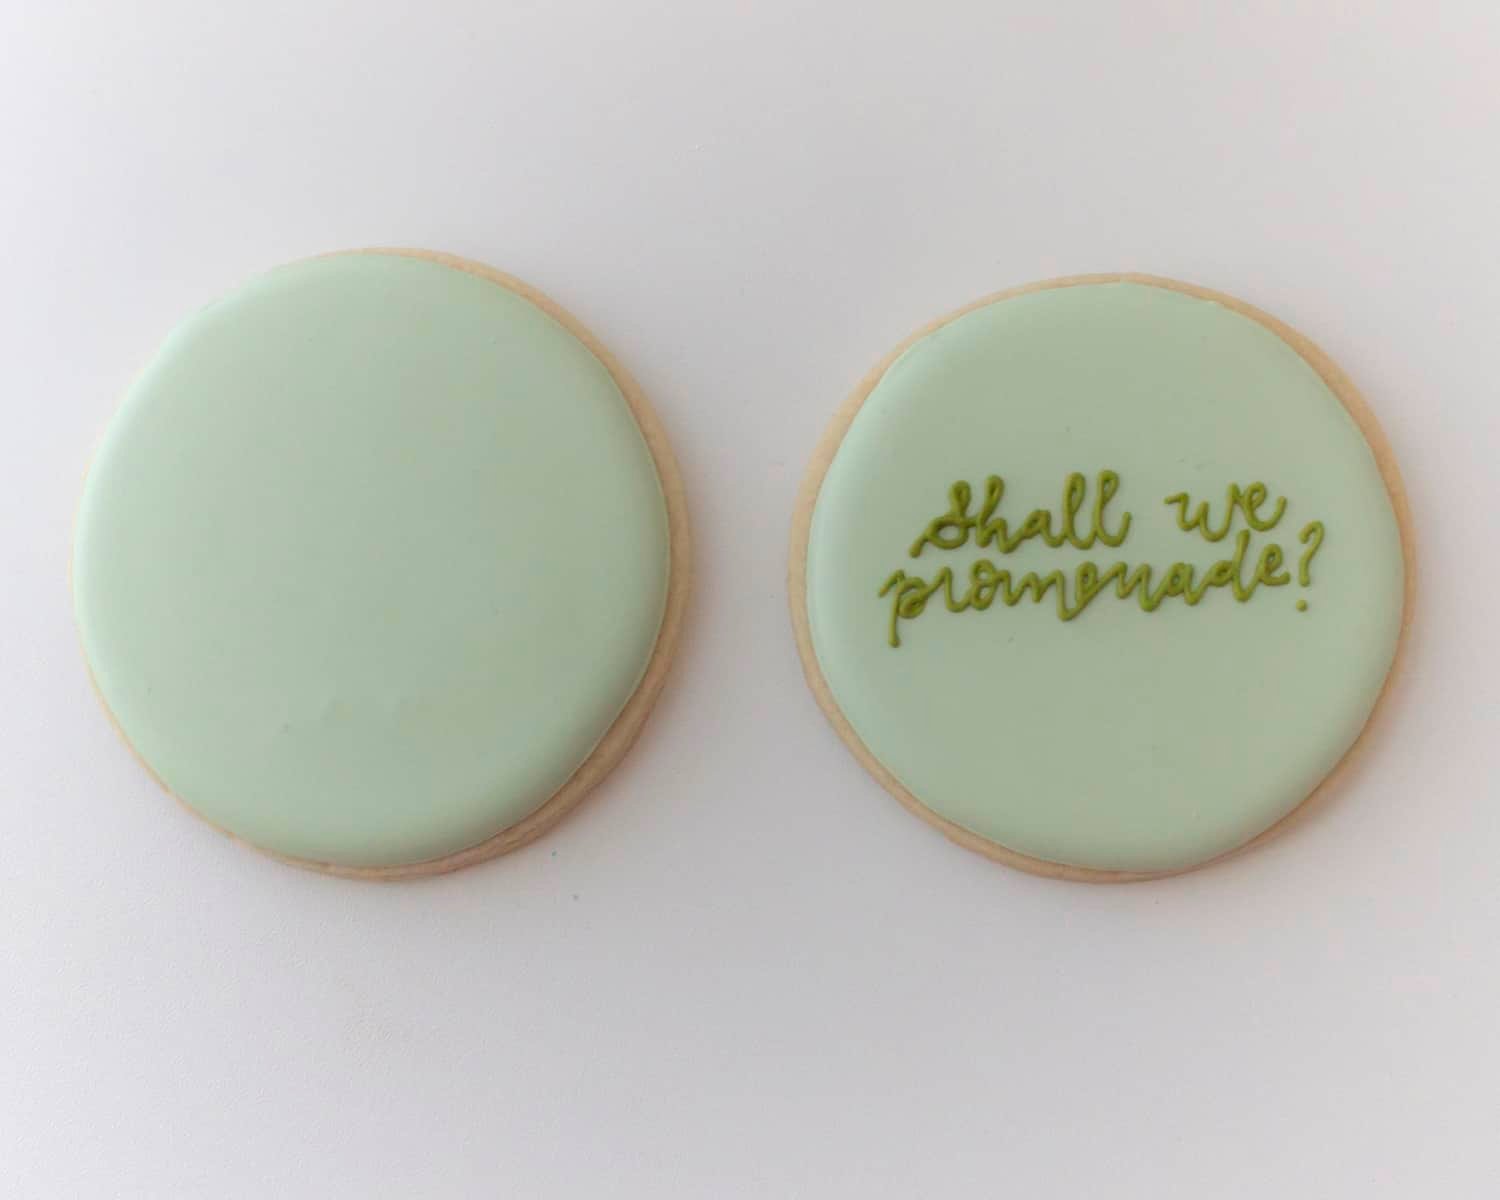 Iced cookie with the text "shall we promenade?"